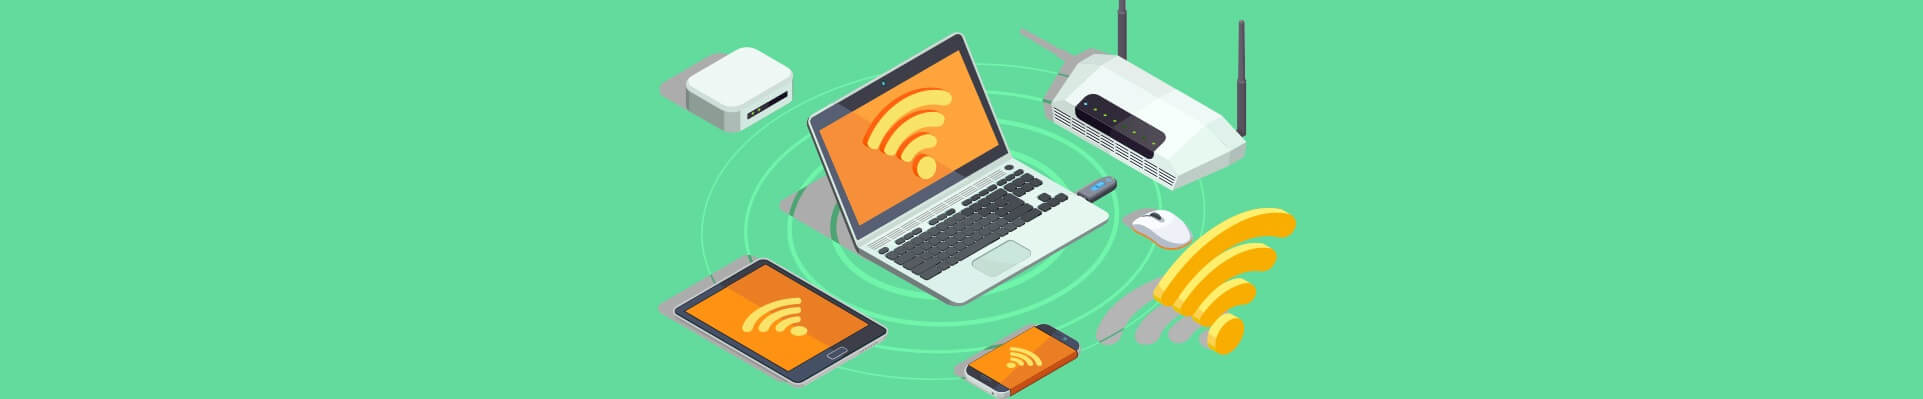 5 INTERESTING FACTS ABOUT WI-FI 